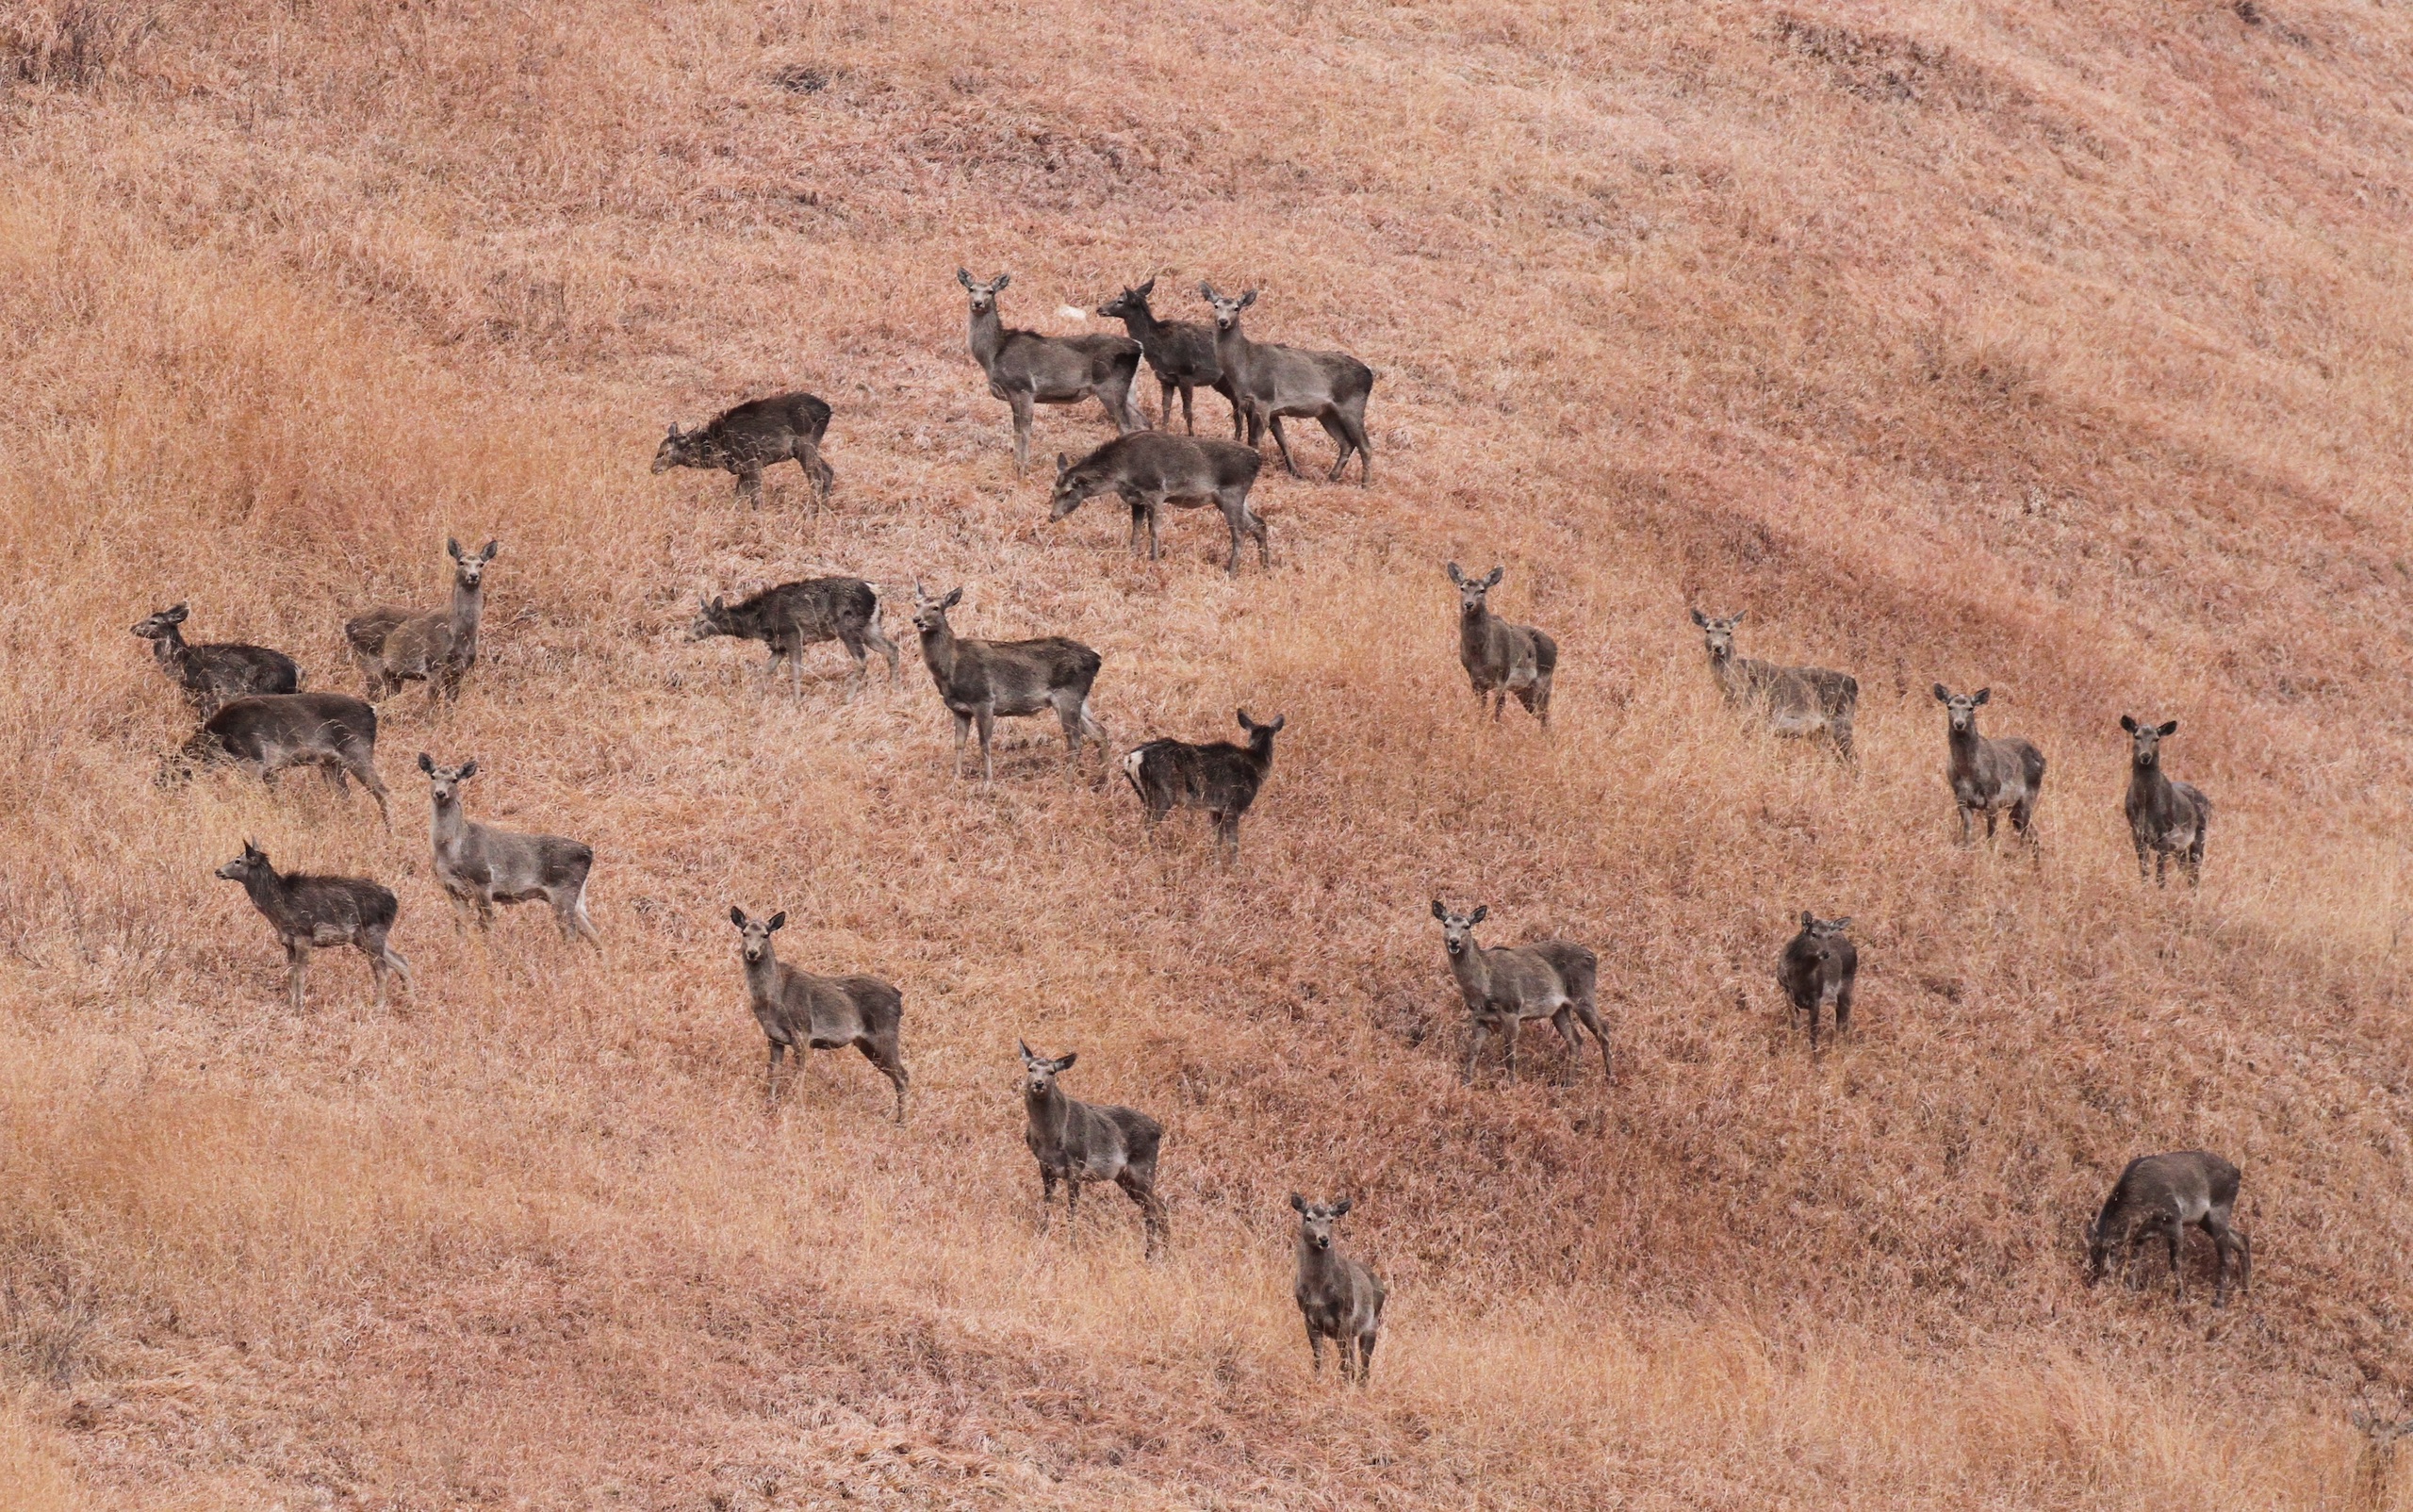 <p>Dachigam National Park, in the Kashmir valley, is the last refuge of the hangul, the only red deer found in the Indian subcontinent (Image: Tahirshawl / <a href="https://commons.wikimedia.org/wiki/File:The_Last_Surviving_Population_of_Hangul.jpg">Wikimedia Commons</a>, <a href="https://creativecommons.org/licenses/by-sa/4.0/deed.en">CC BY-SA</a>)</p>